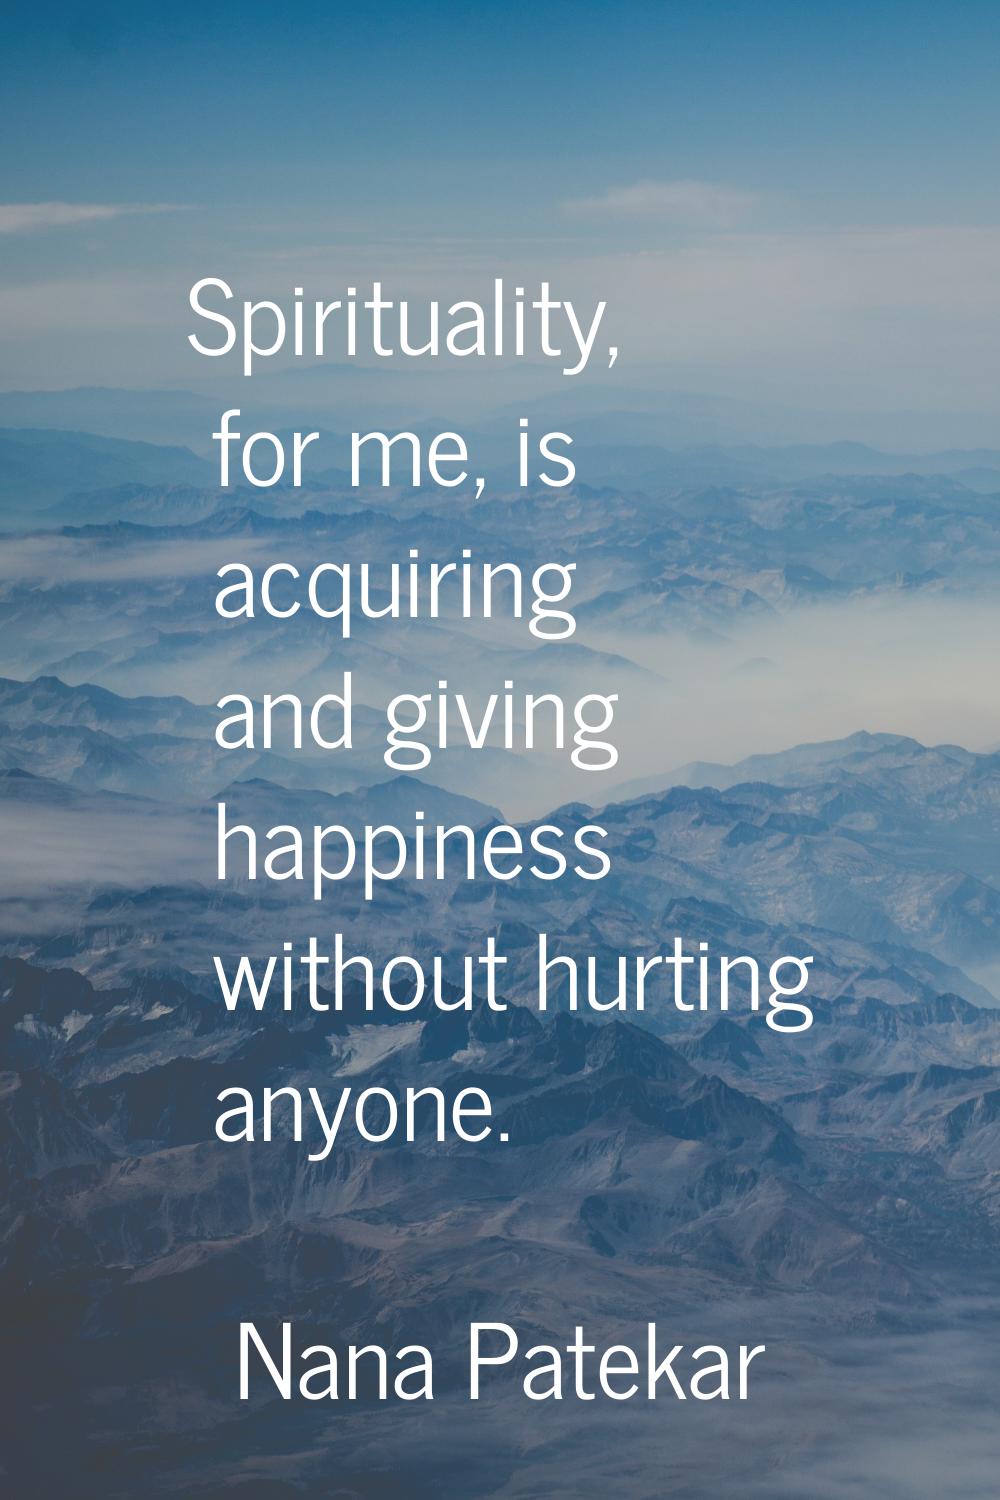 Spirituality, for me, is acquiring and giving happiness without hurting anyone.